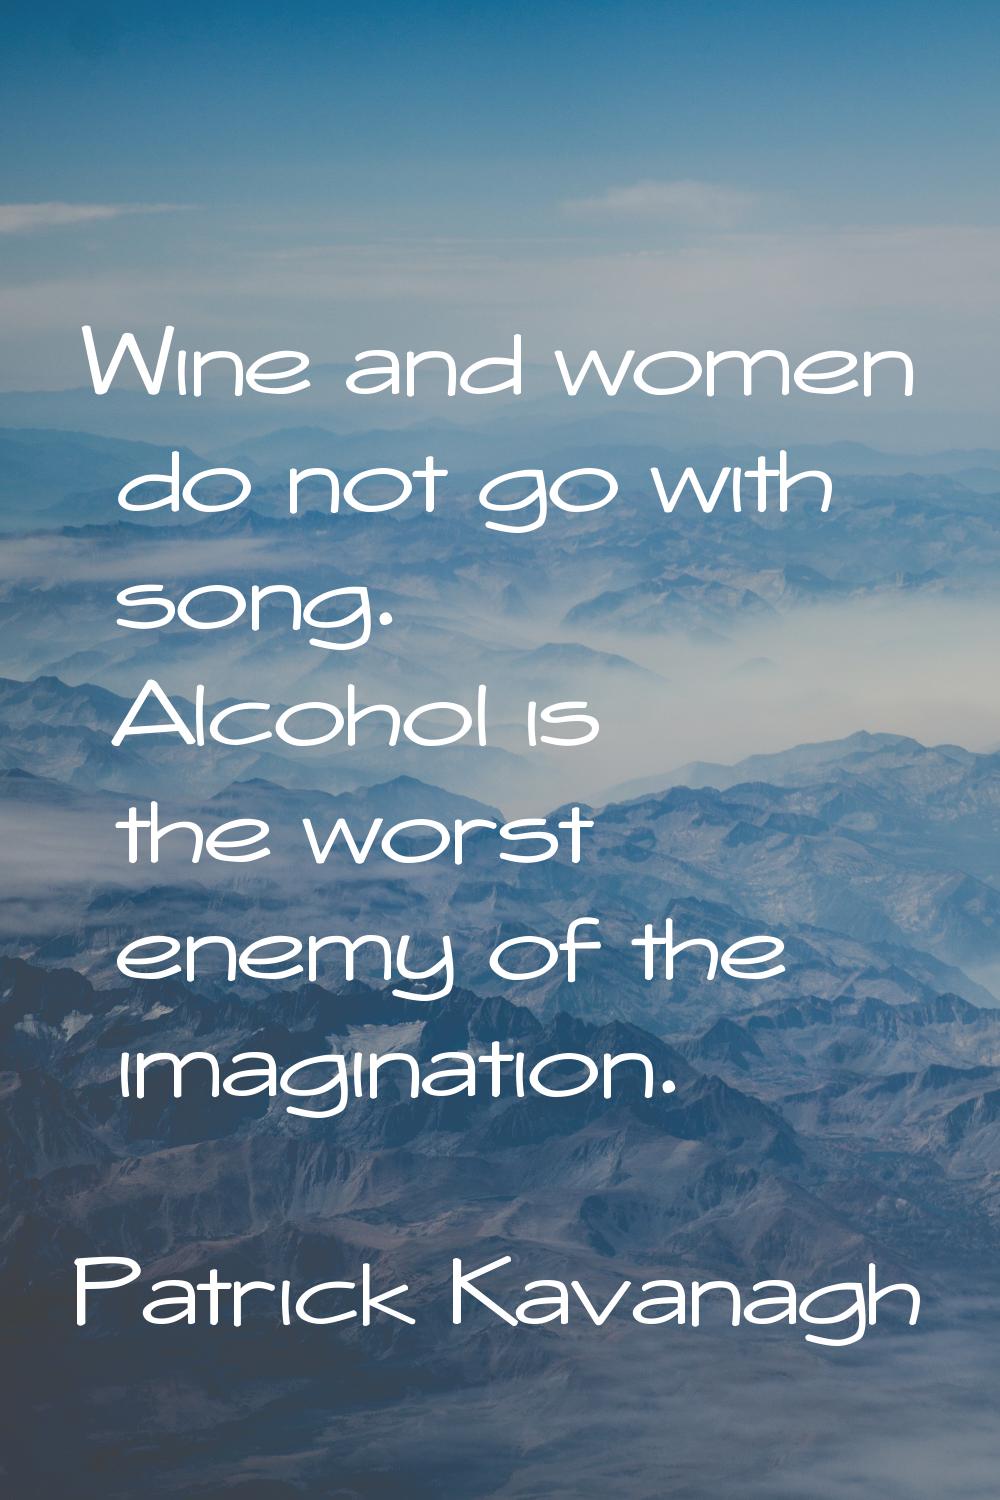 Wine and women do not go with song. Alcohol is the worst enemy of the imagination.